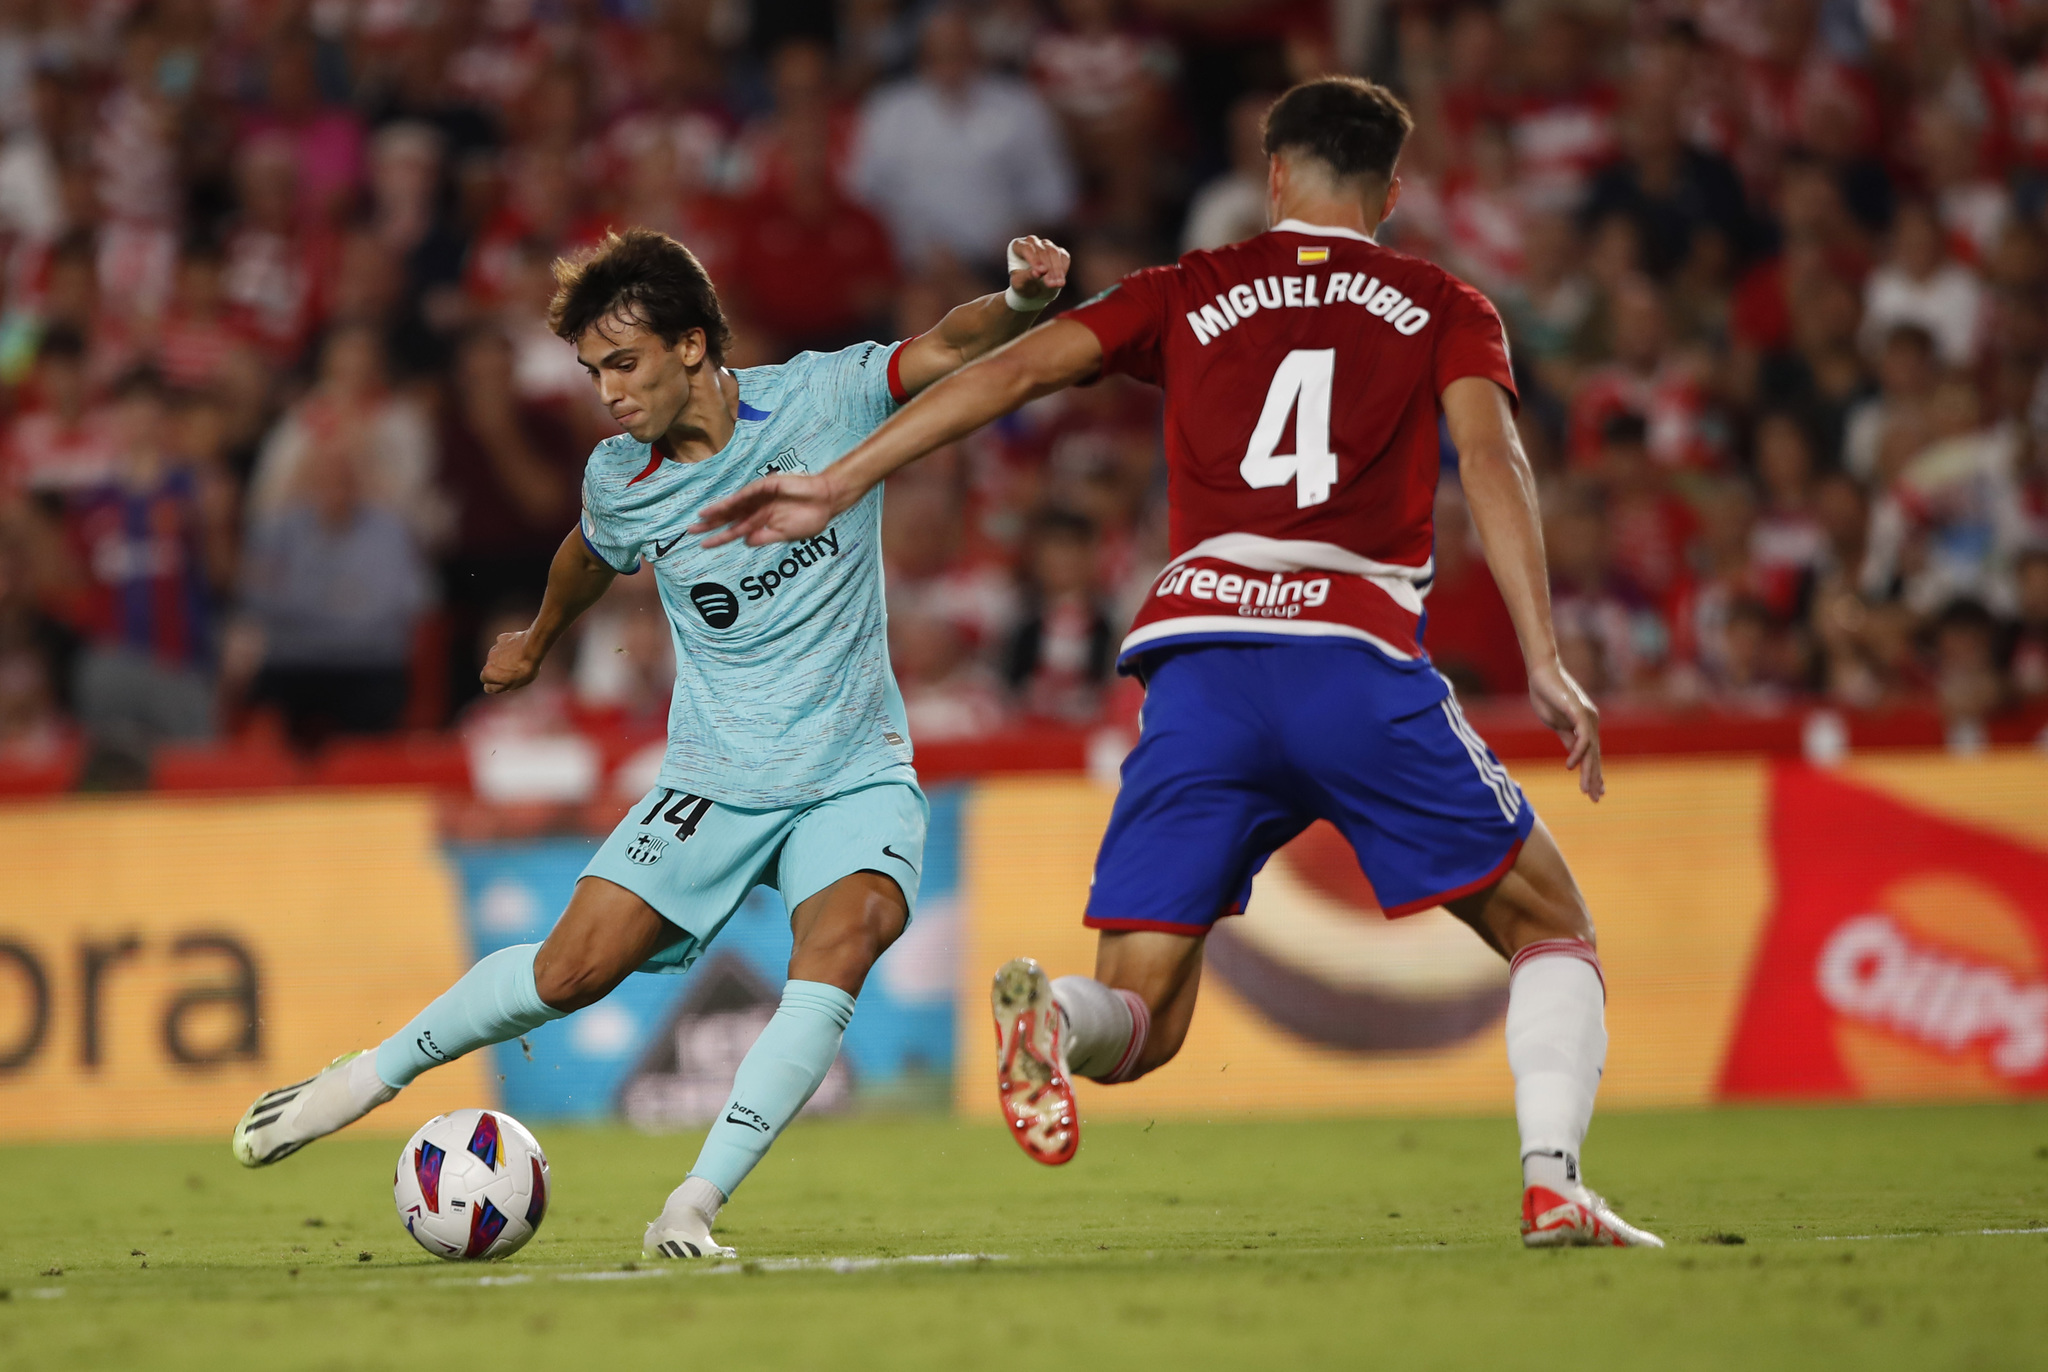 Barcelona's Joao Felix fights for the ball with  lt;HIT gt;Granada lt;/HIT gt;'s Miguel Rubio during a Spanish La Liga soccer match between  lt;HIT gt;Granada lt;/HIT gt; and Barcelona at Los Carmanes Stadium in  lt;HIT gt;Granada lt;/HIT gt;, Spain, Sunday, Oct. 8, 2023. (AP Photo/Fermin Rodriguez)